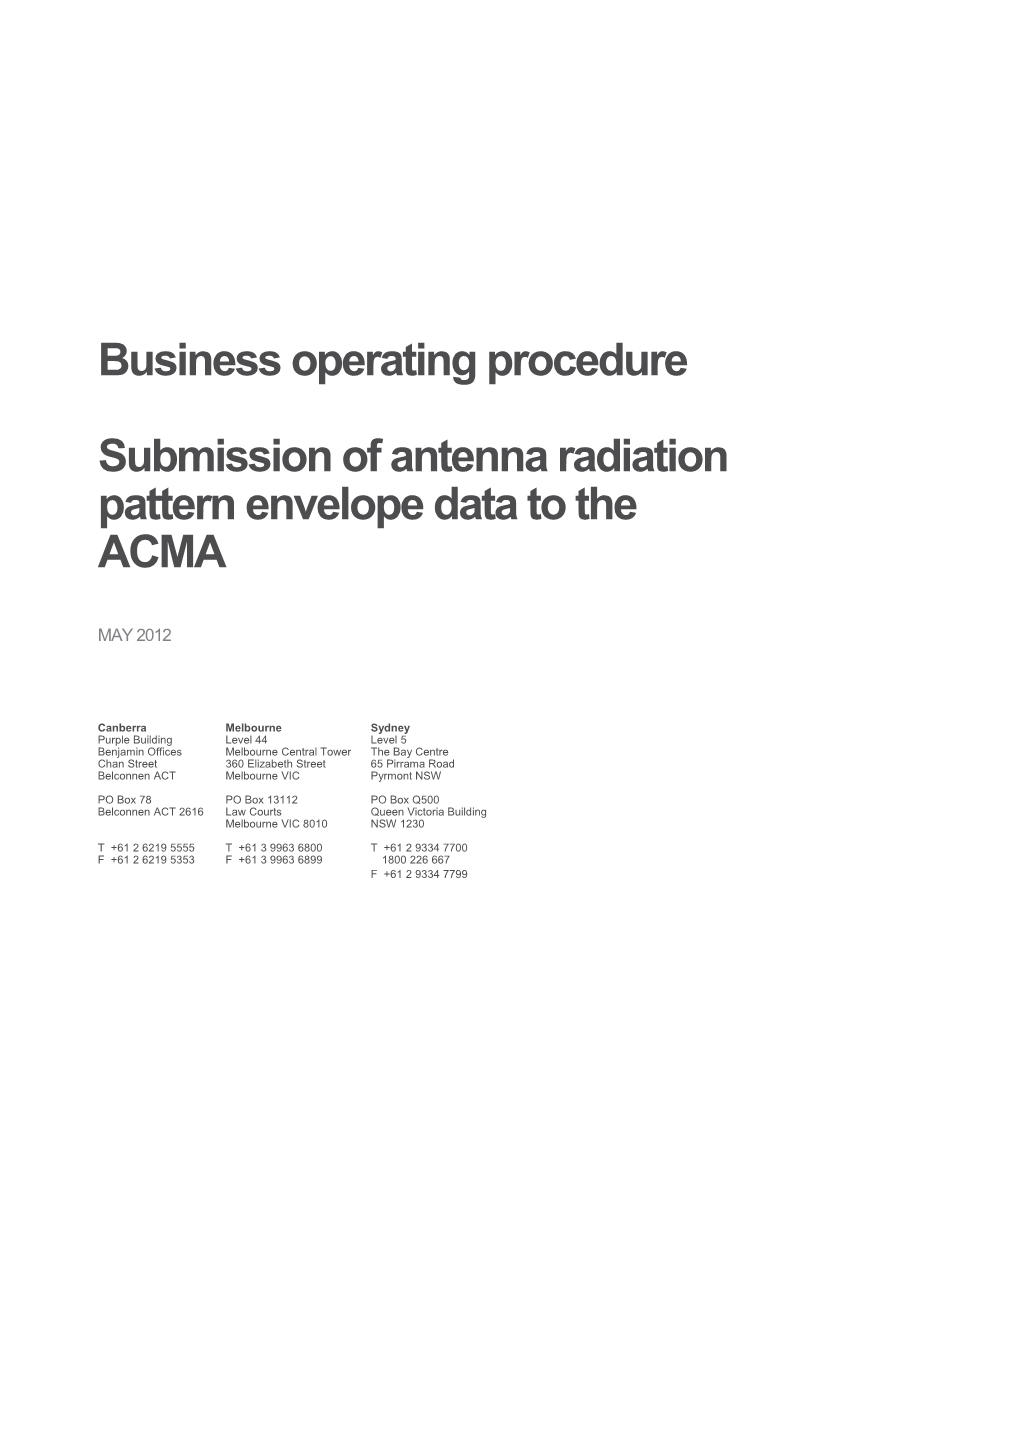 BOP - Submission of Antenna Radiation Pattern Envelope Data to the ACMA